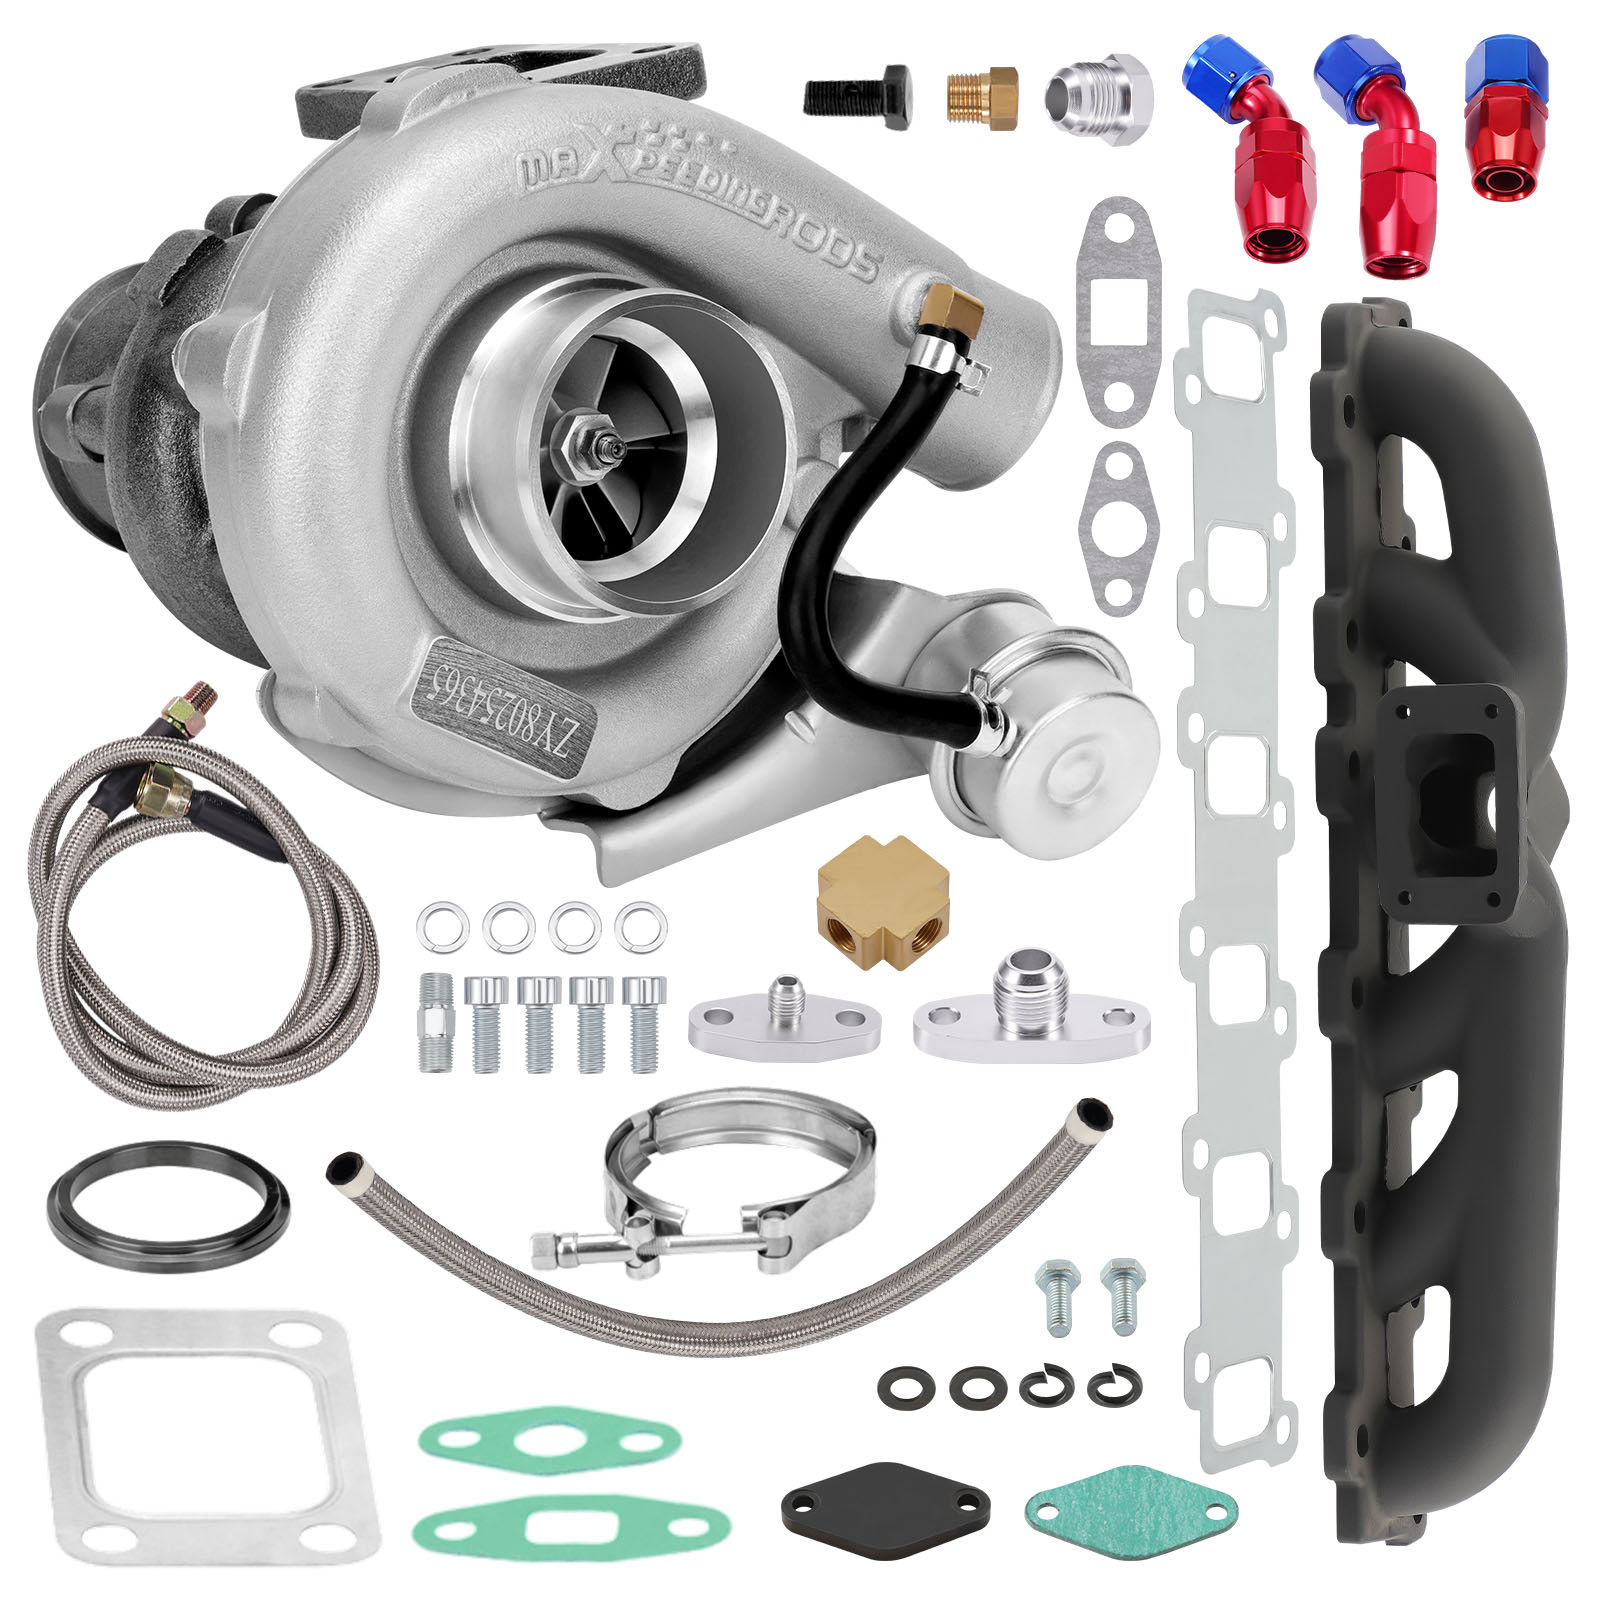 Exhausted manifold + T3 Turbo turbocharger Kit For 4.2 L TD42 Engine Oil Cooled